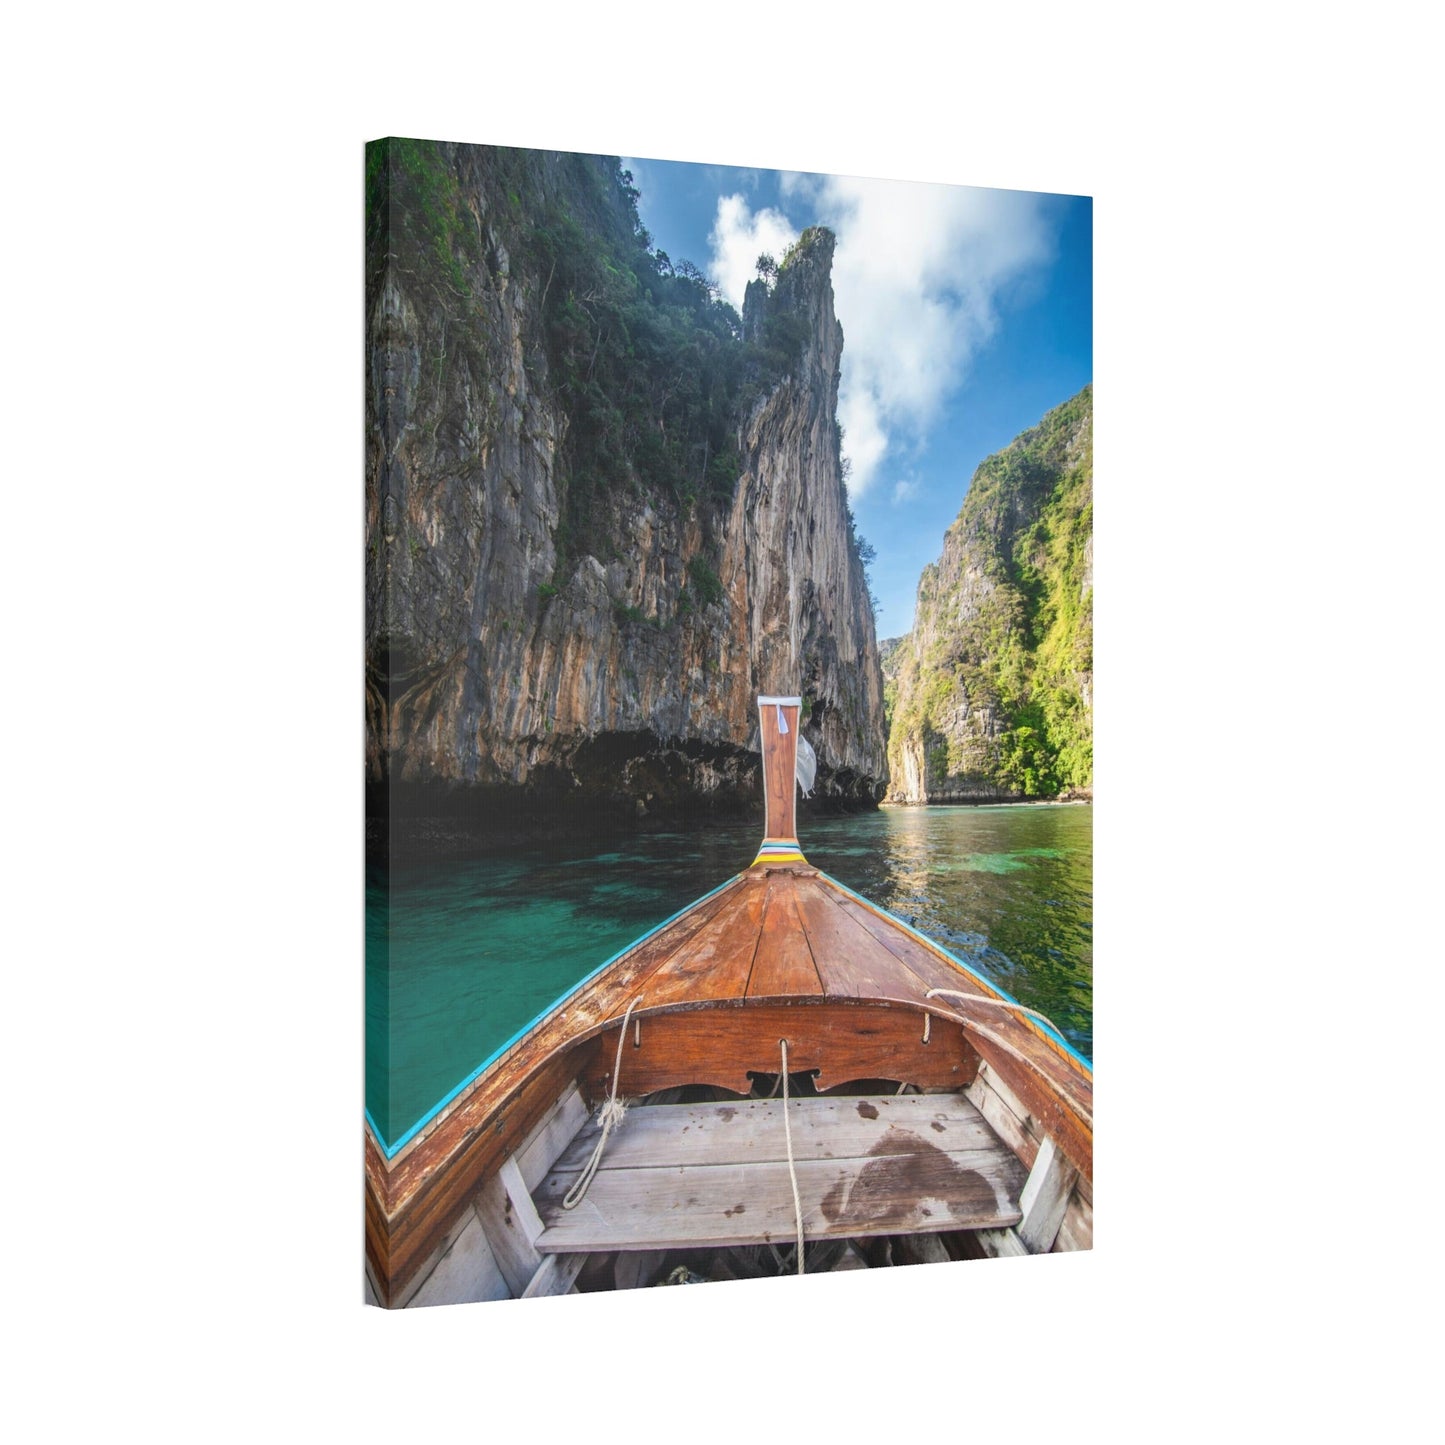 Boating Beauty: Canvas and Framed Poster with Beautiful Boating Art